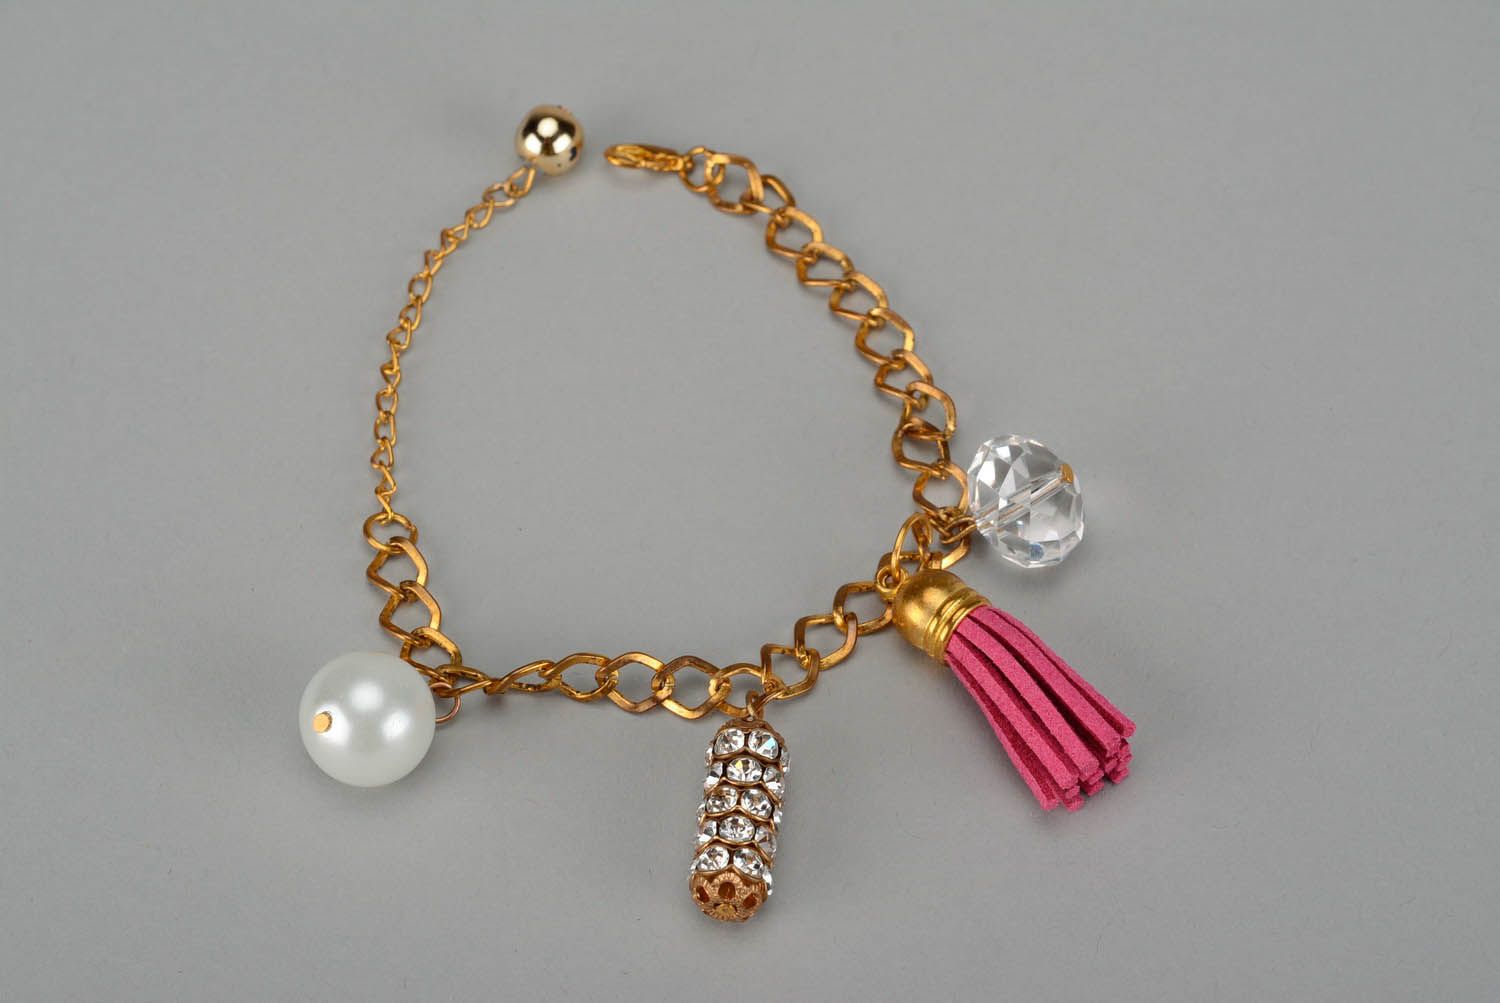 Bracelet with Crystals and Beads Sparkles photo 1